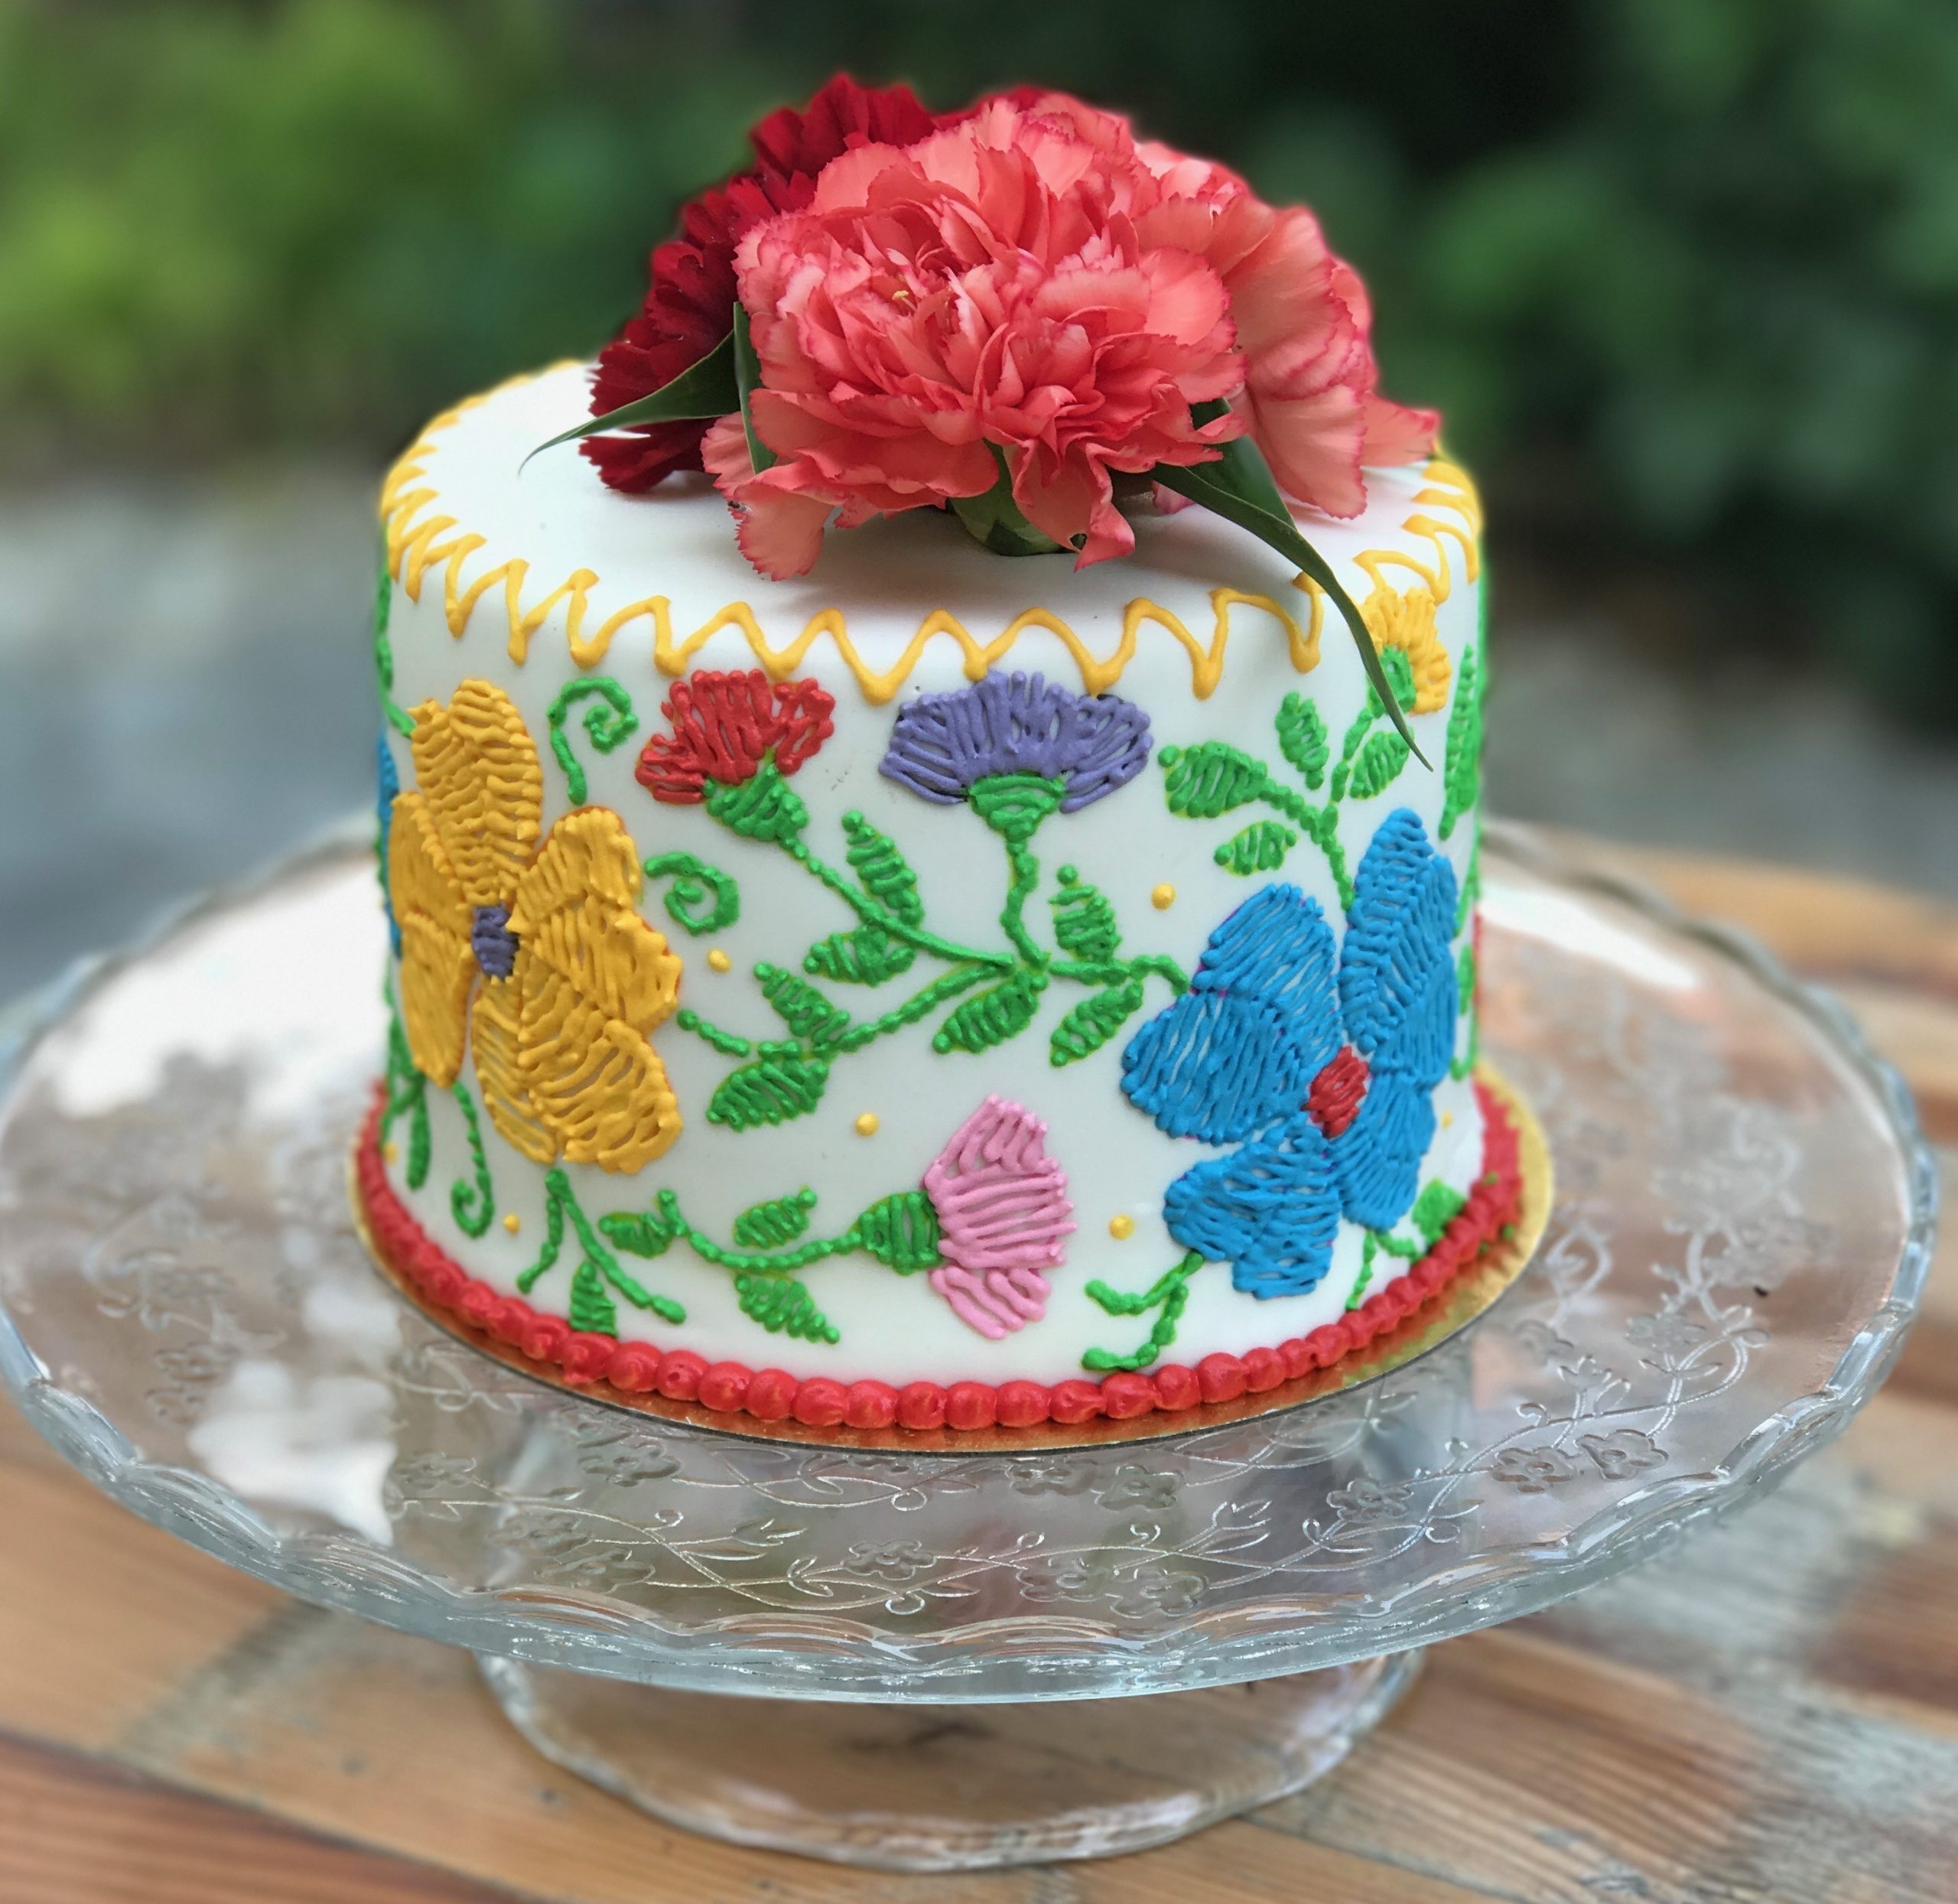 Mexican embroidery delight